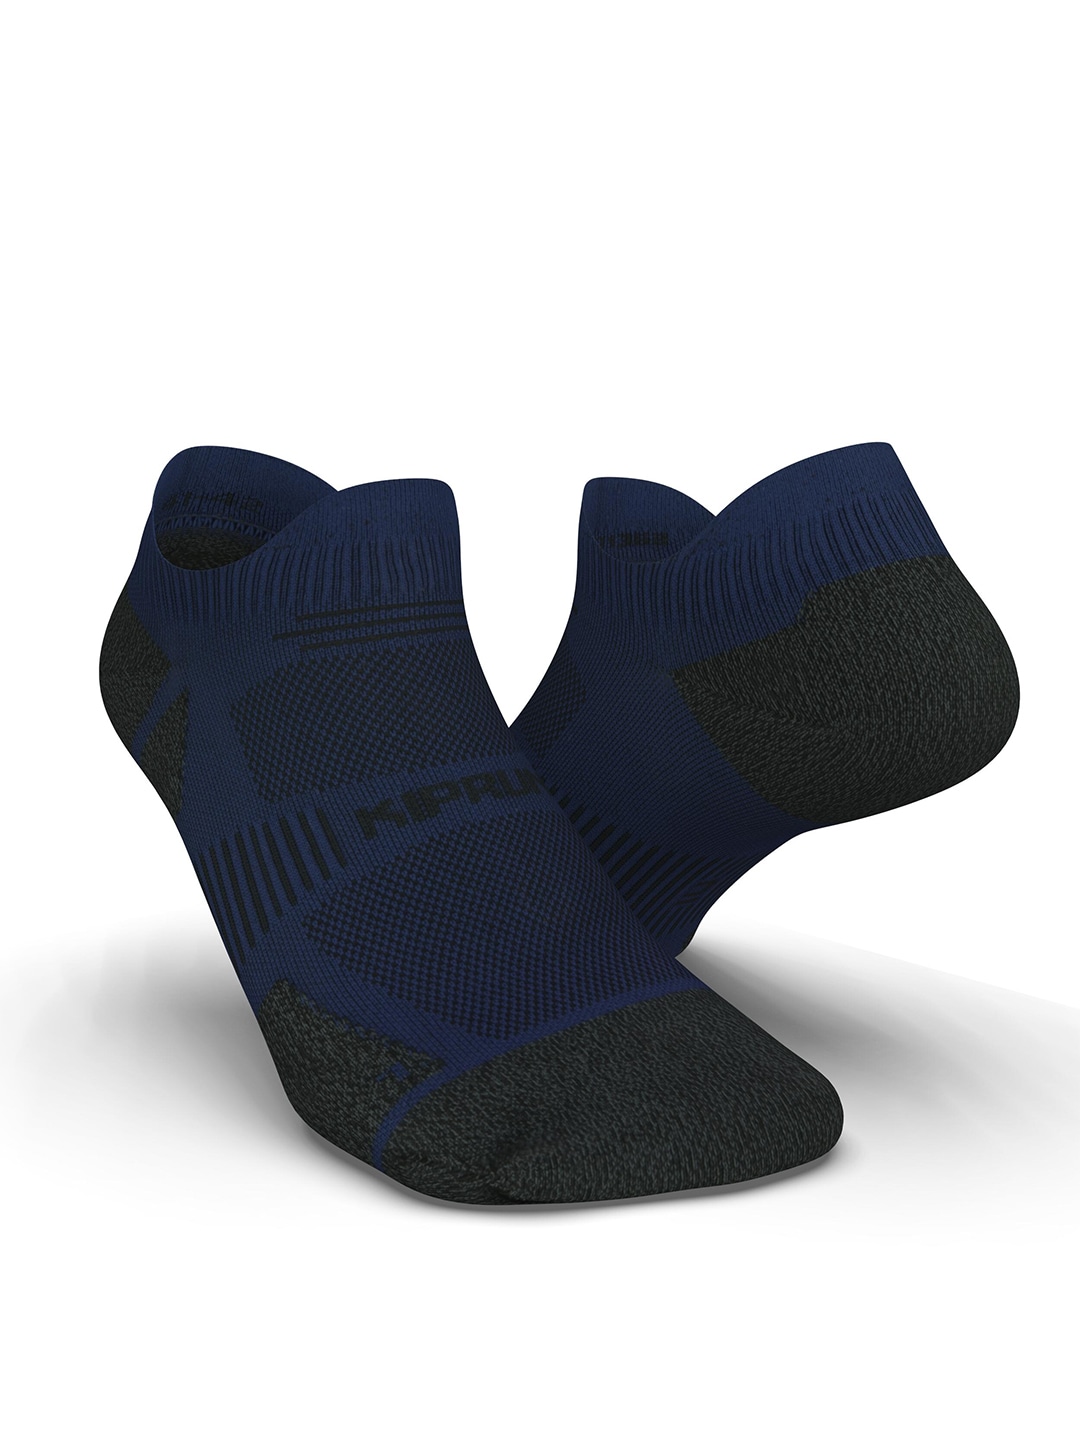 Accessories Socks | KIPRUN By Decathlon Assorted Ankle-Length Run900 Invisible Fine Running Socks - XI44837